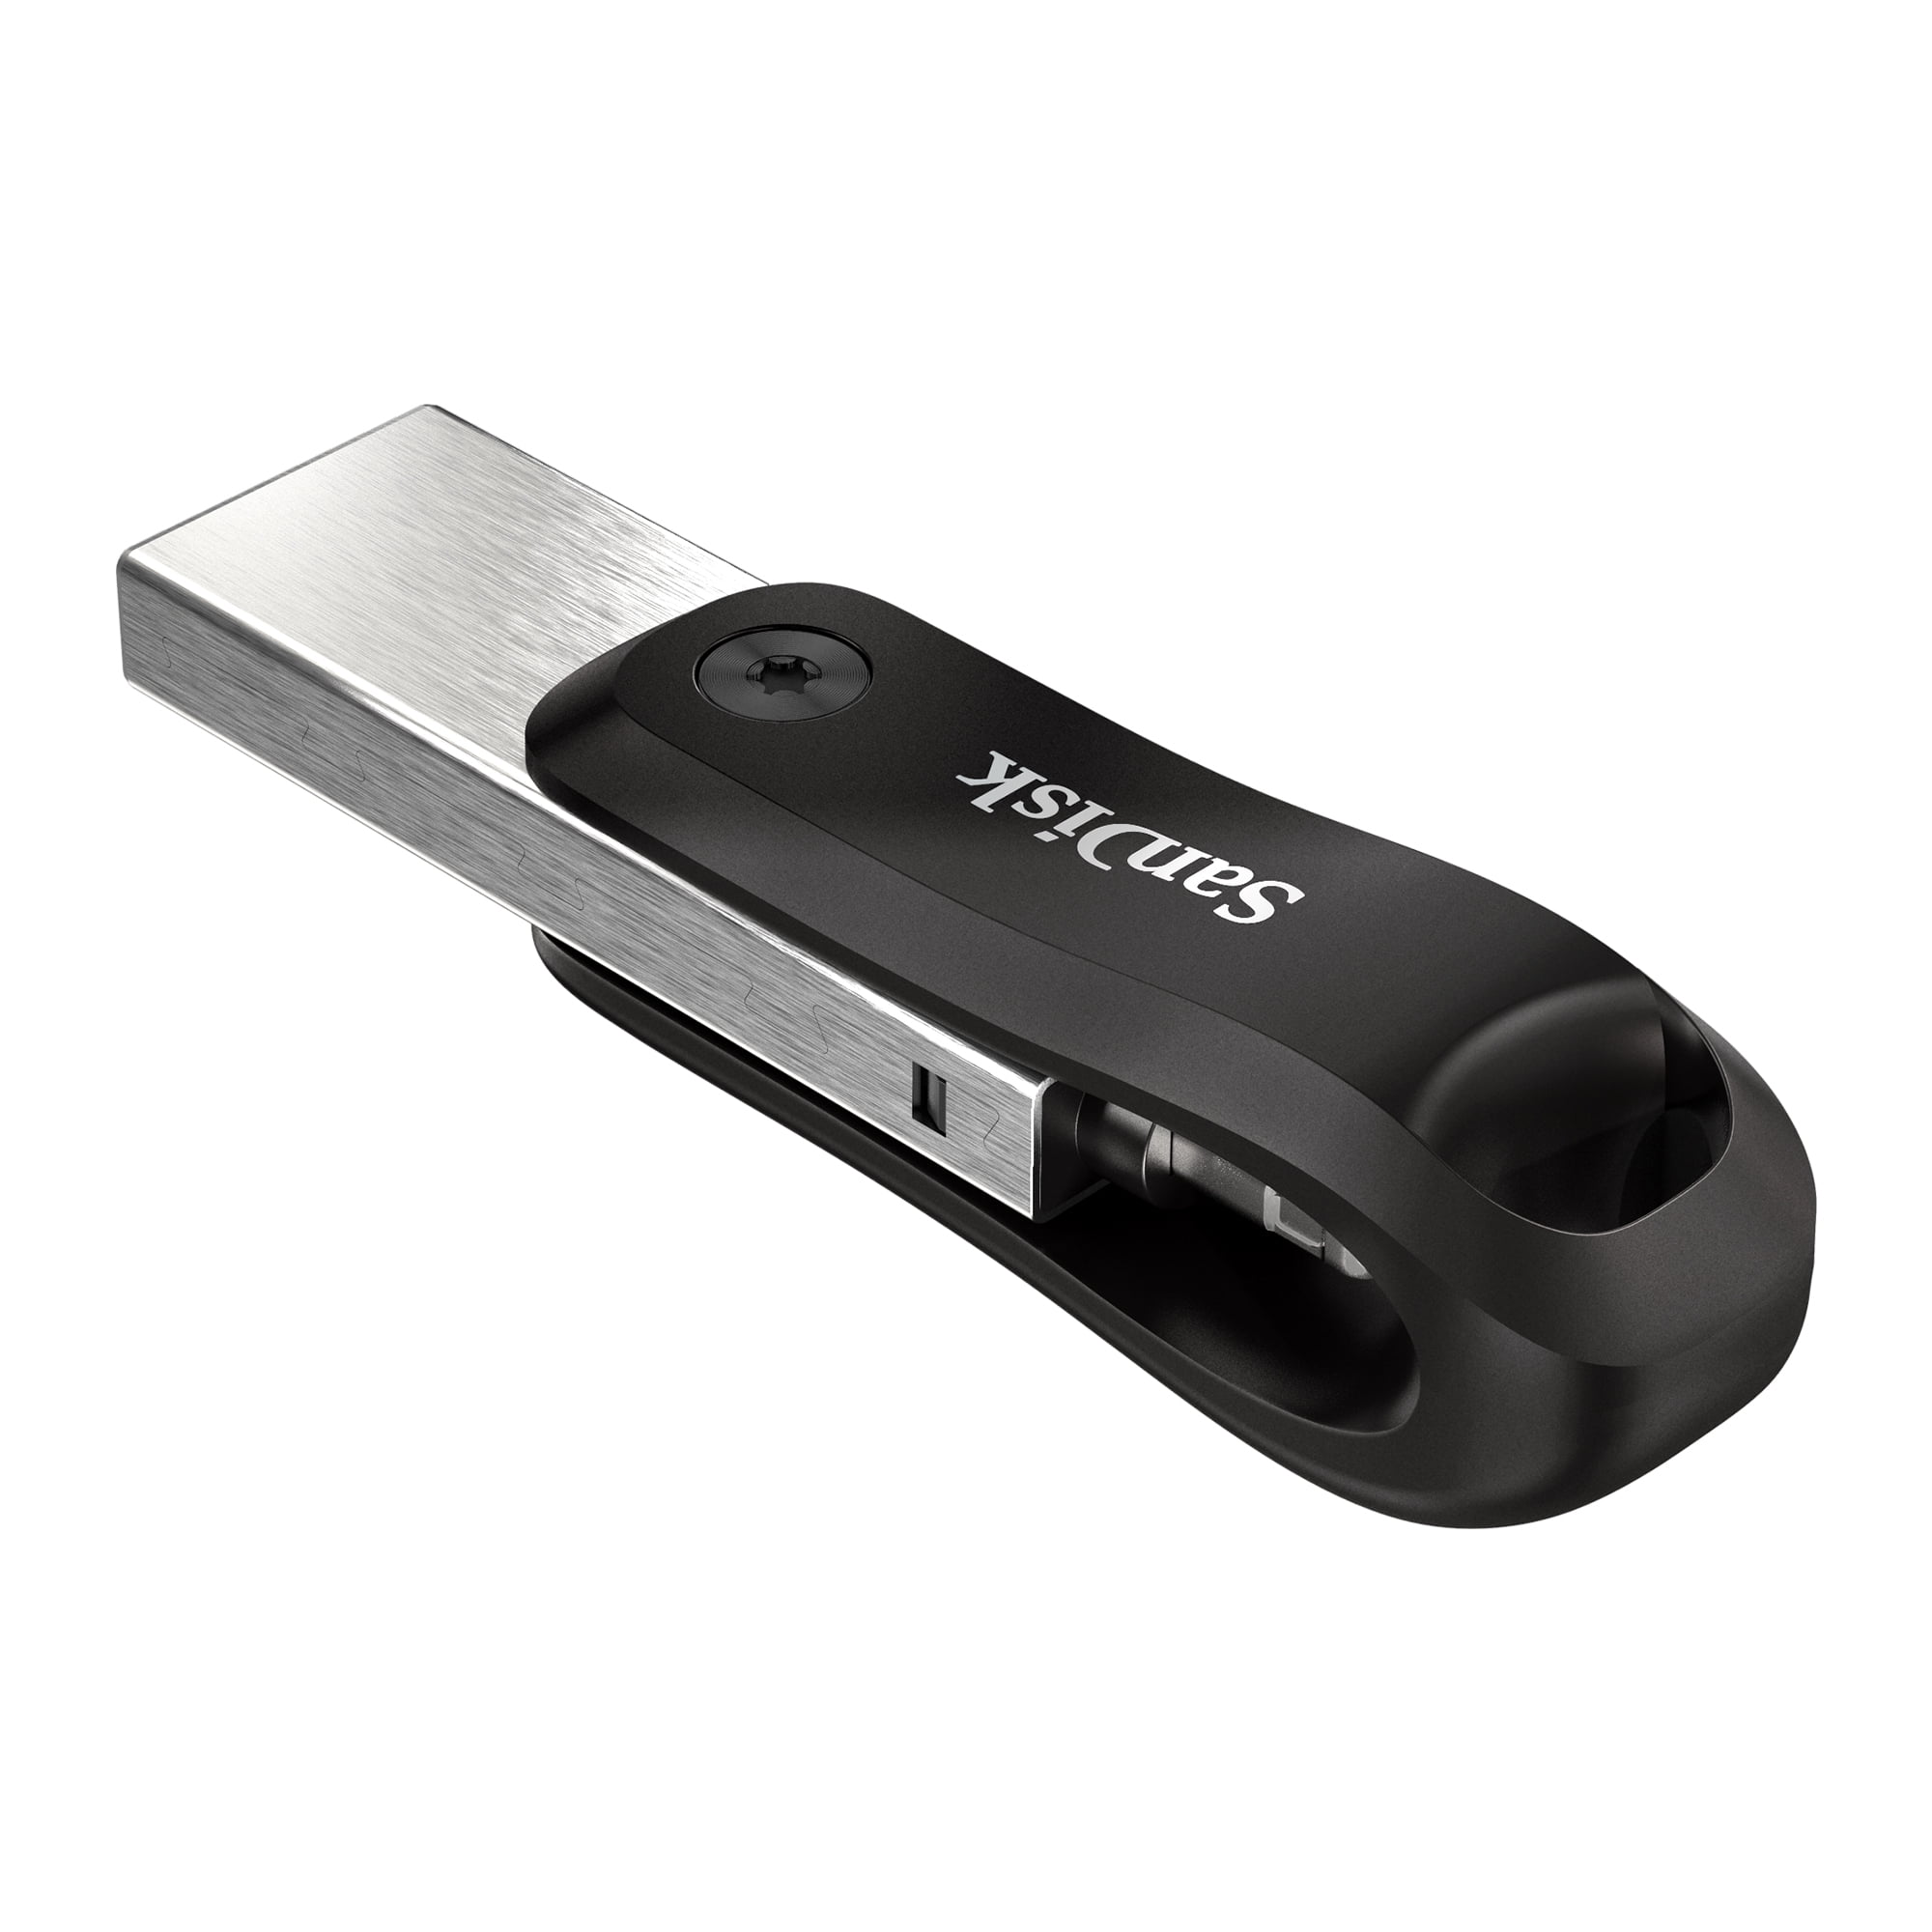 SanDisk 64GB iXpand Flash Drive Go, for iPhone and iPad - SDIX60N